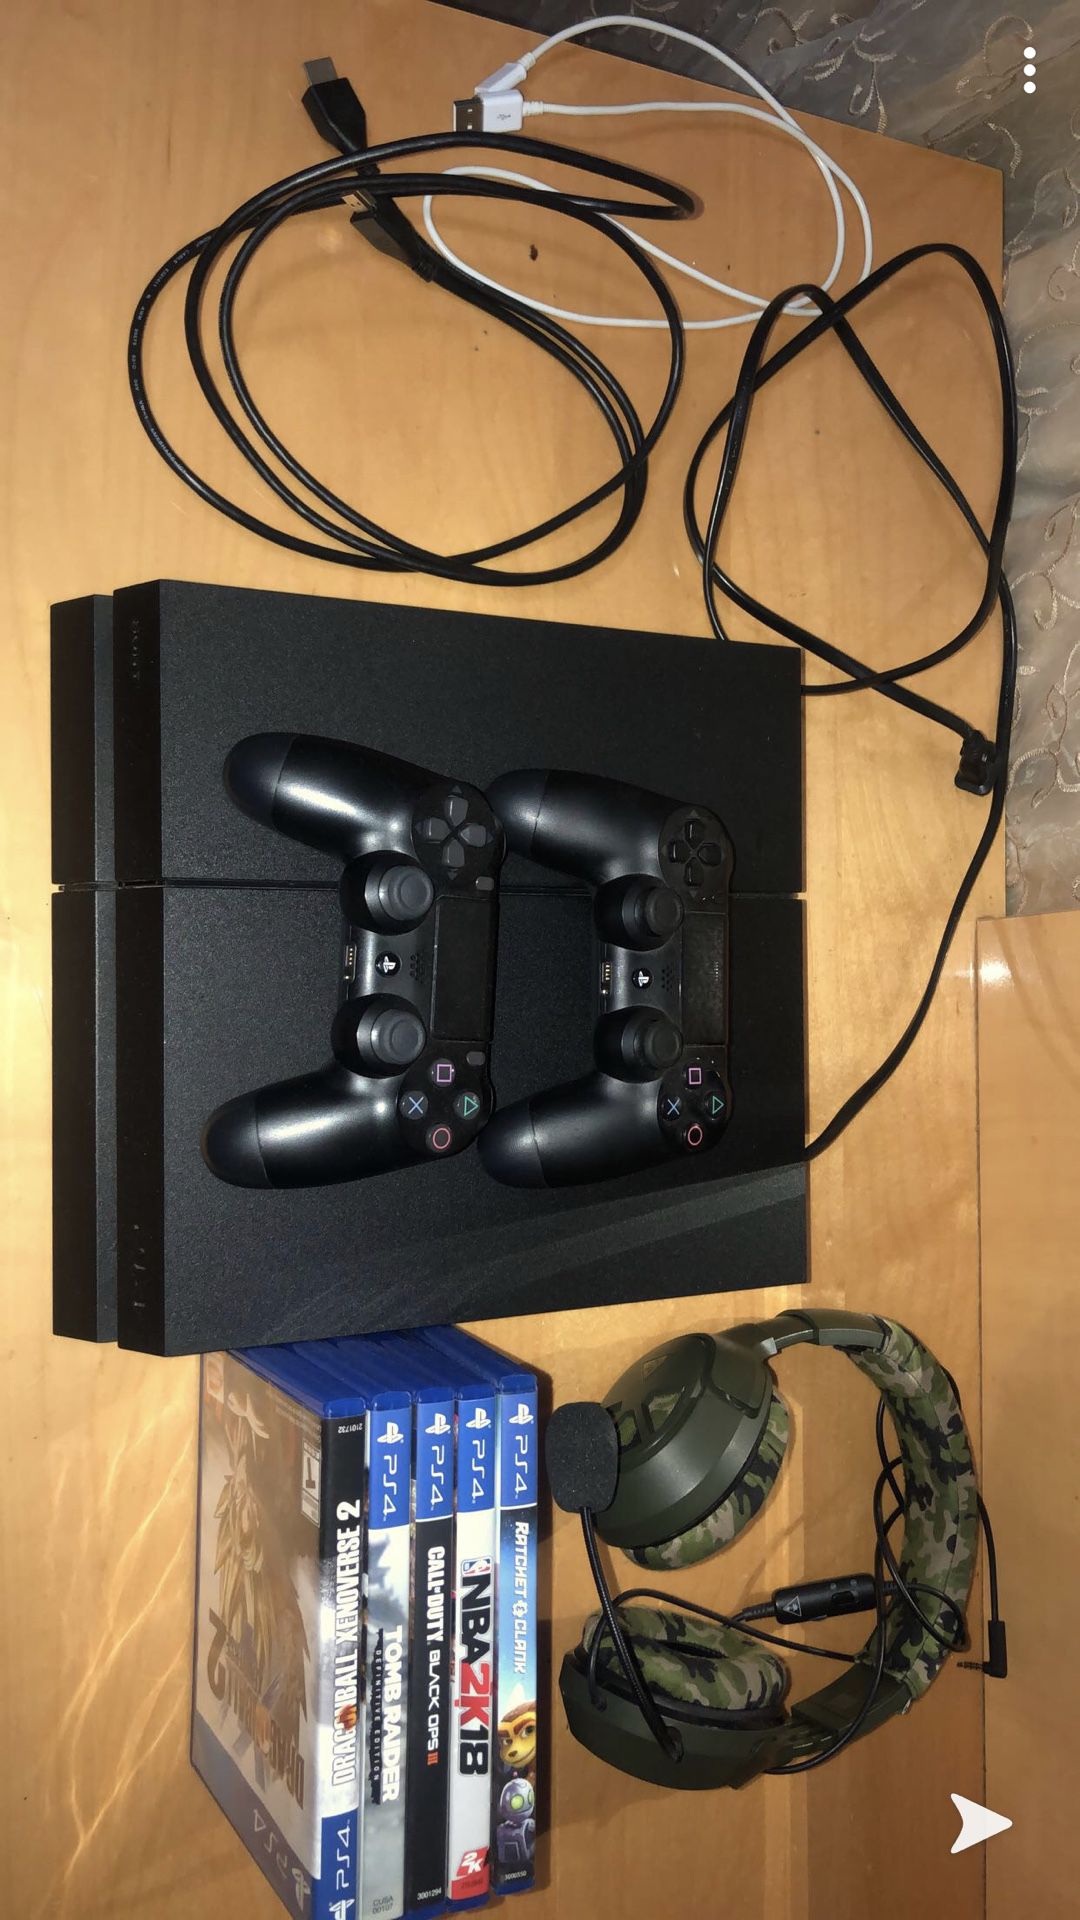 PS4- with controllers, headset, games.